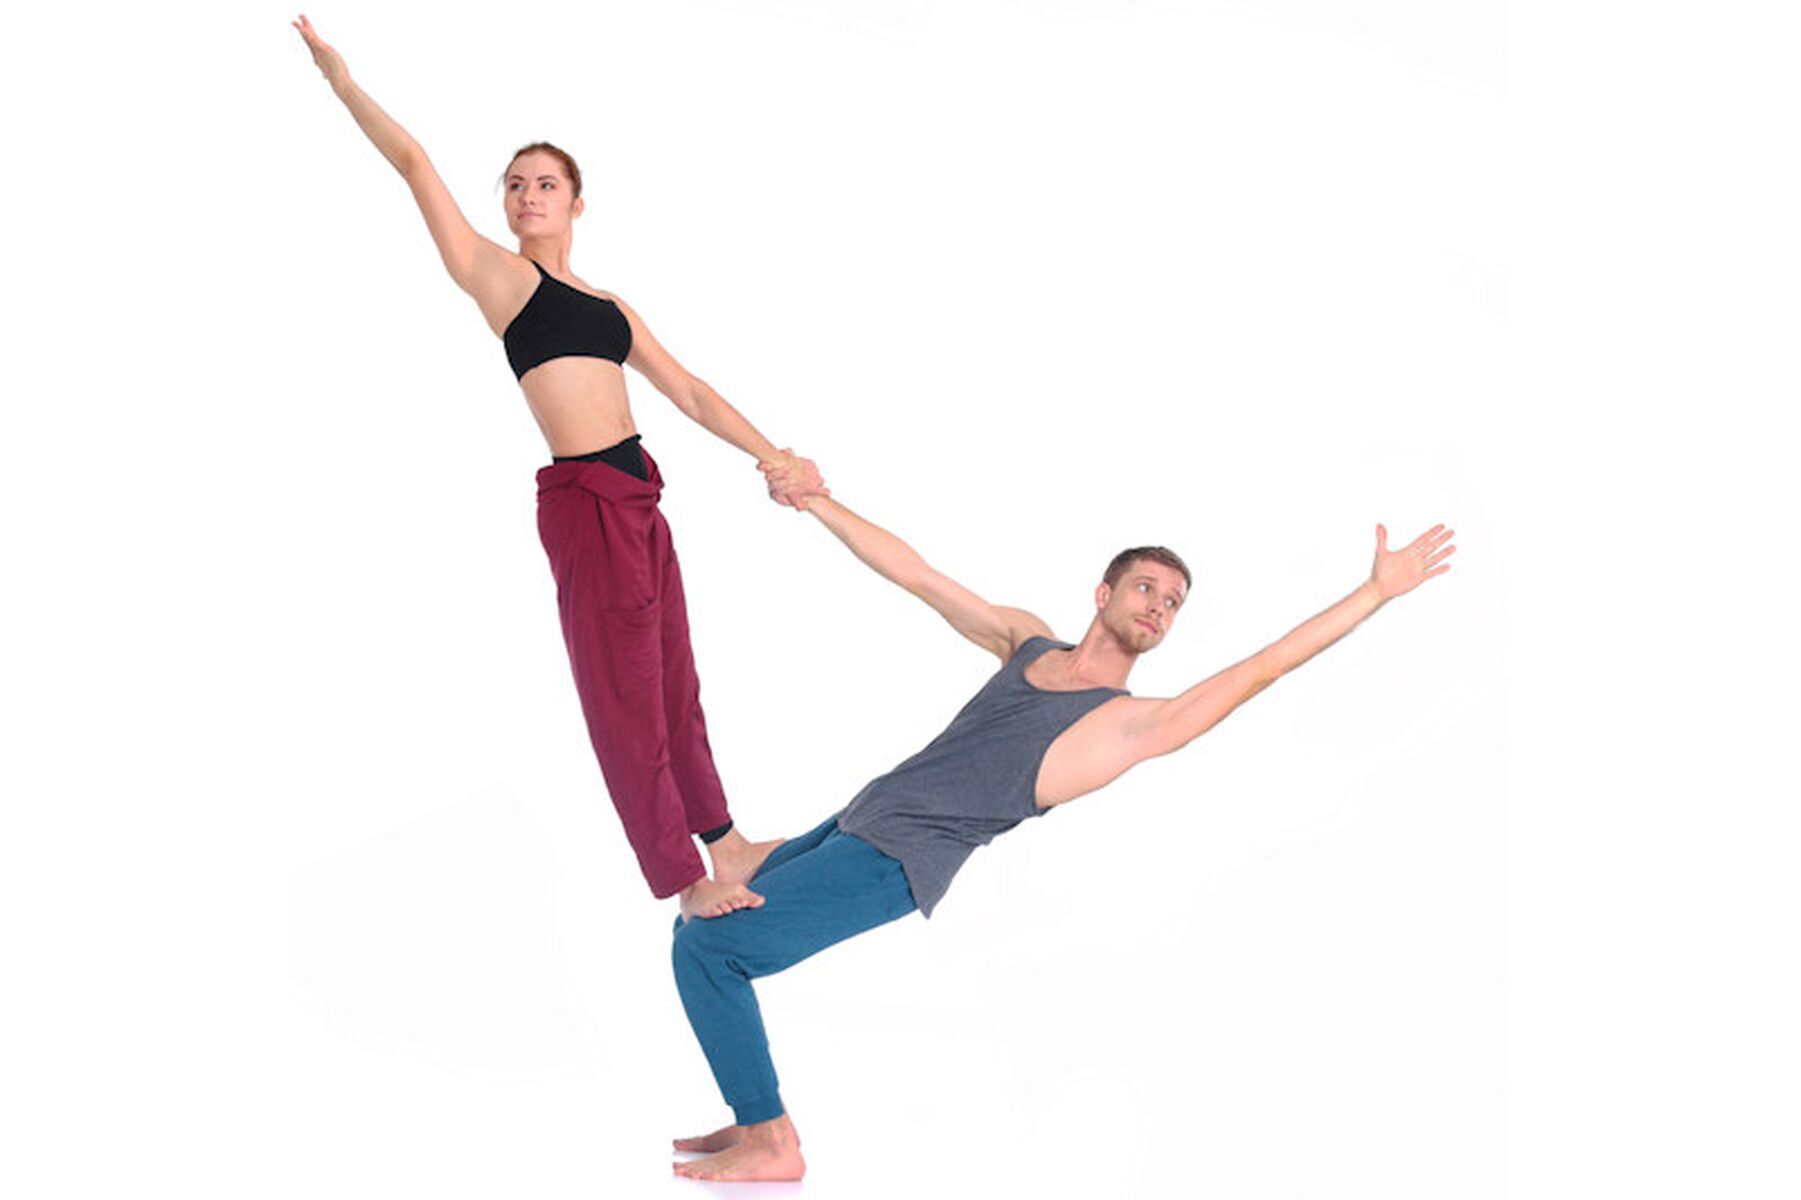 Pin by Denise on MOVEMENT: AcroYoga | Partner yoga poses, Acro yoga poses,  Partner yoga